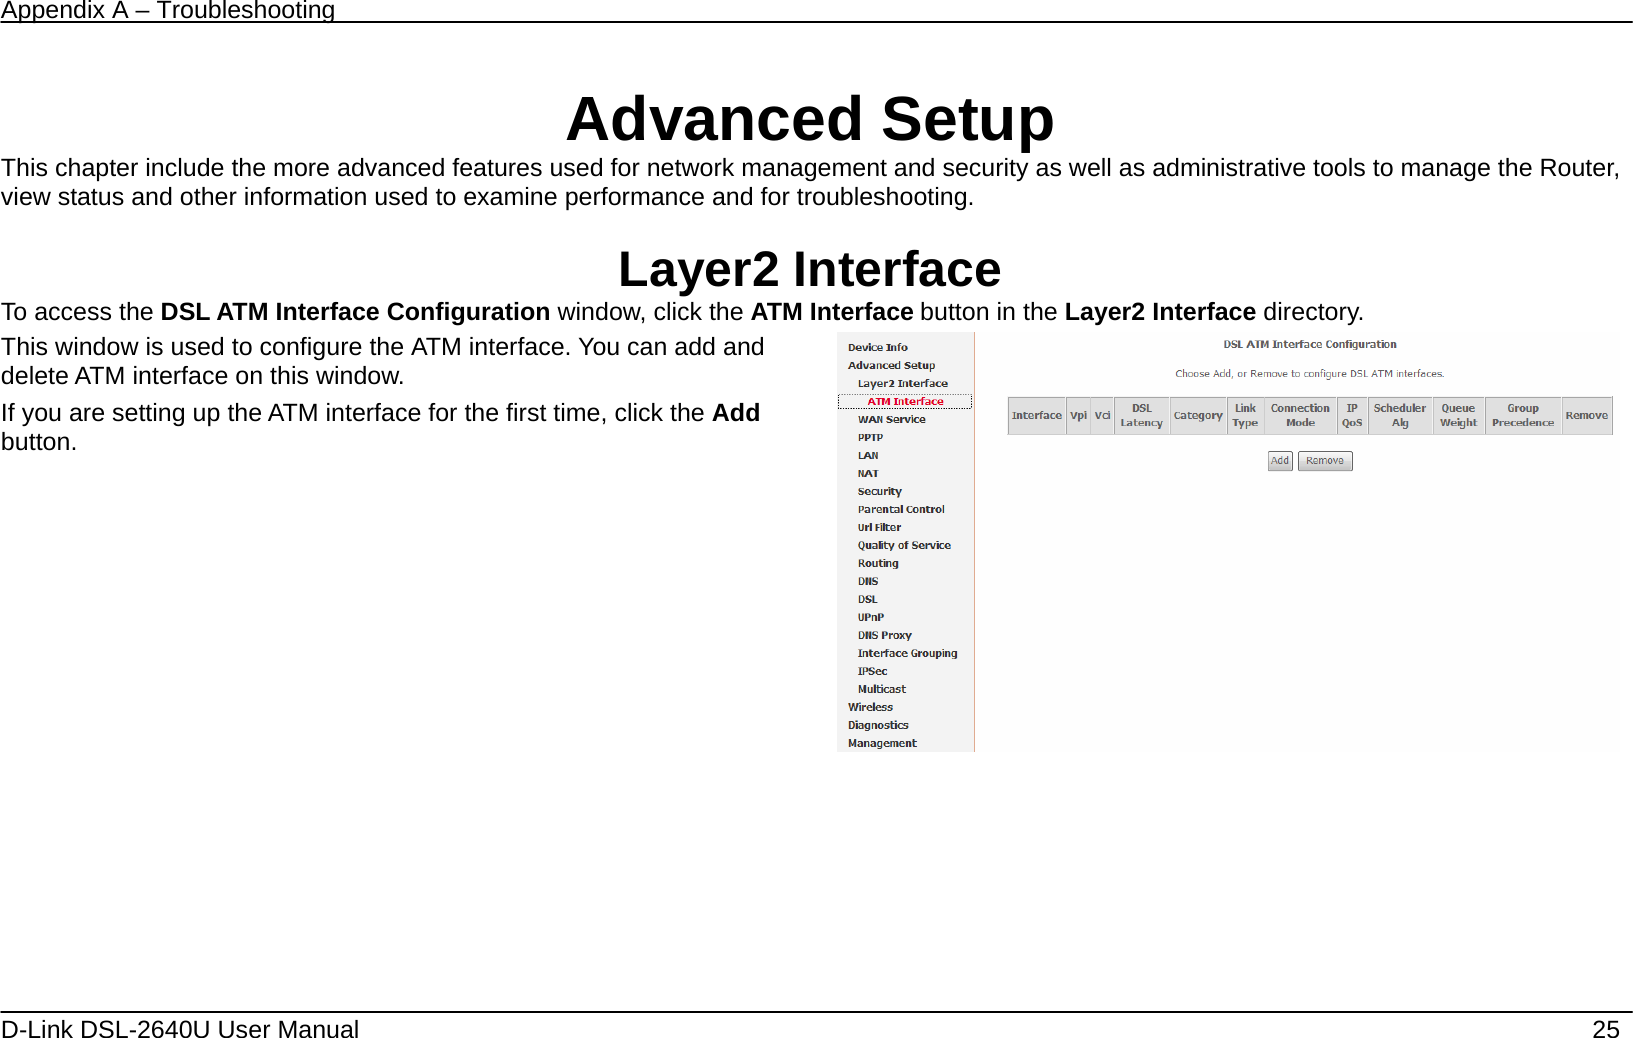 Appendix A – Troubleshooting   D-Link DSL-2640U User Manual    25    Advanced Setup This chapter include the more advanced features used for network management and security as well as administrative tools to manage the Router, view status and other information used to examine performance and for troubleshooting.  Layer2 Interface To access the DSL ATM Interface Configuration window, click the ATM Interface button in the Layer2 Interface directory. This window is used to configure the ATM interface. You can add and delete ATM interface on this window.   If you are setting up the ATM interface for the first time, click the Add button.                     